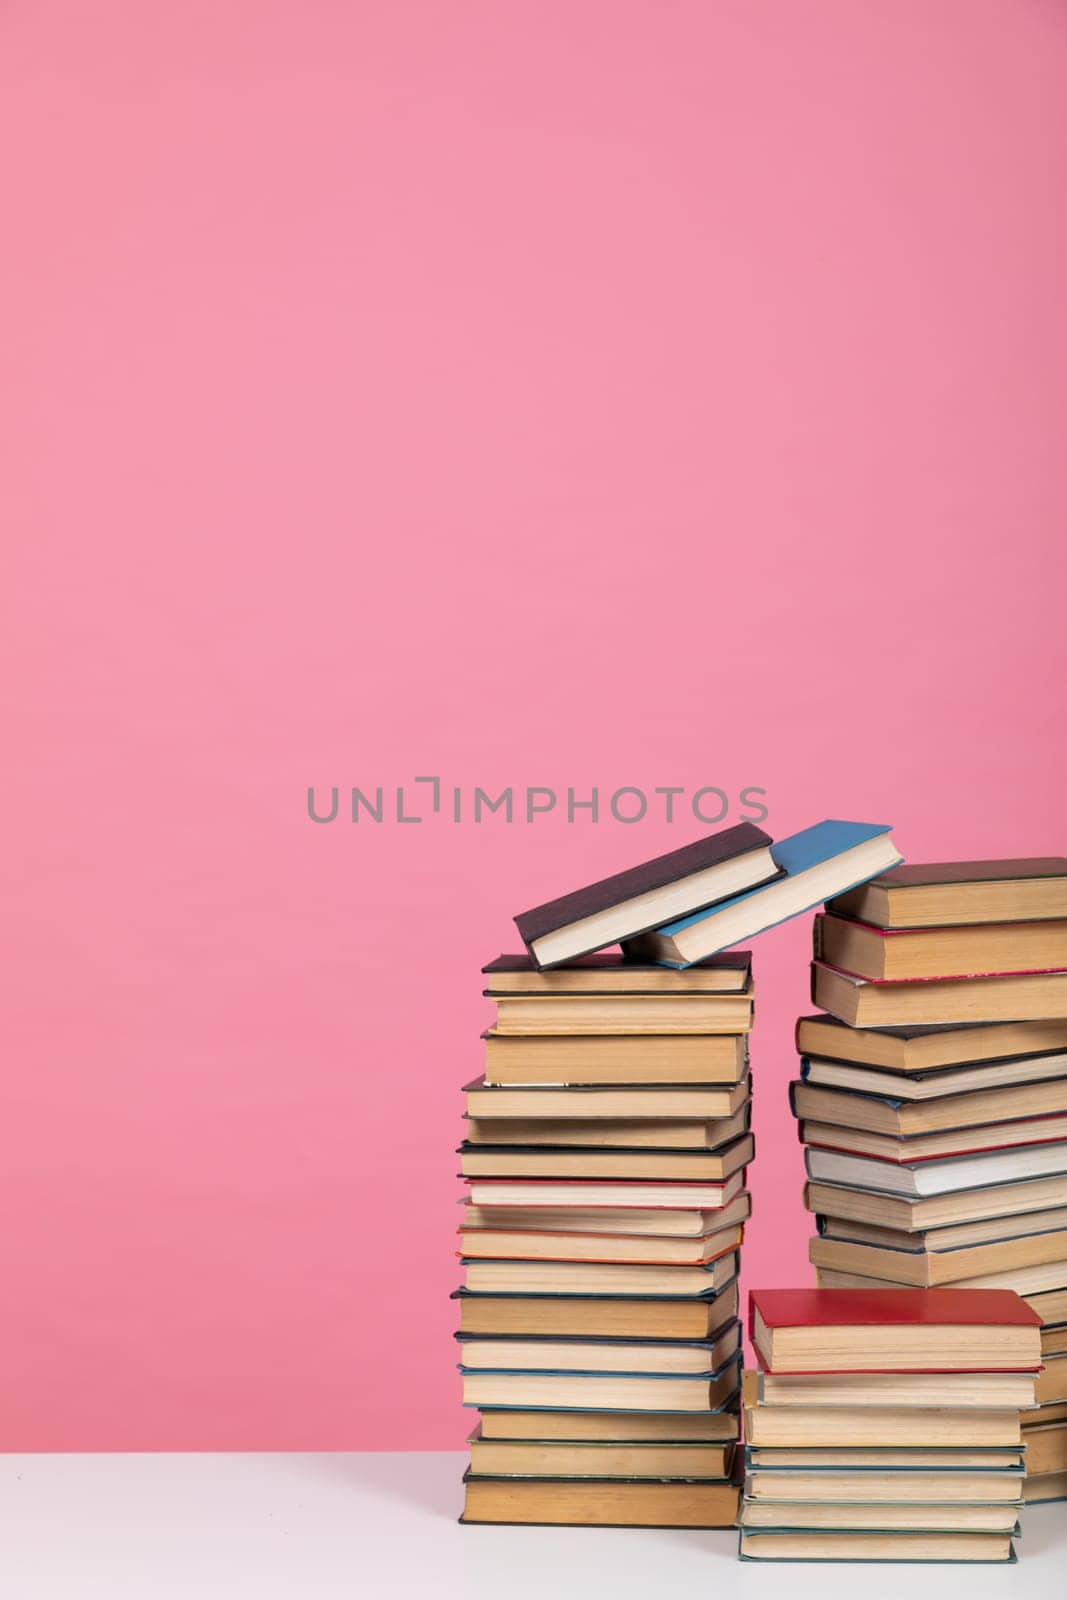 science education stack of books on pink background literacy training by Simakov